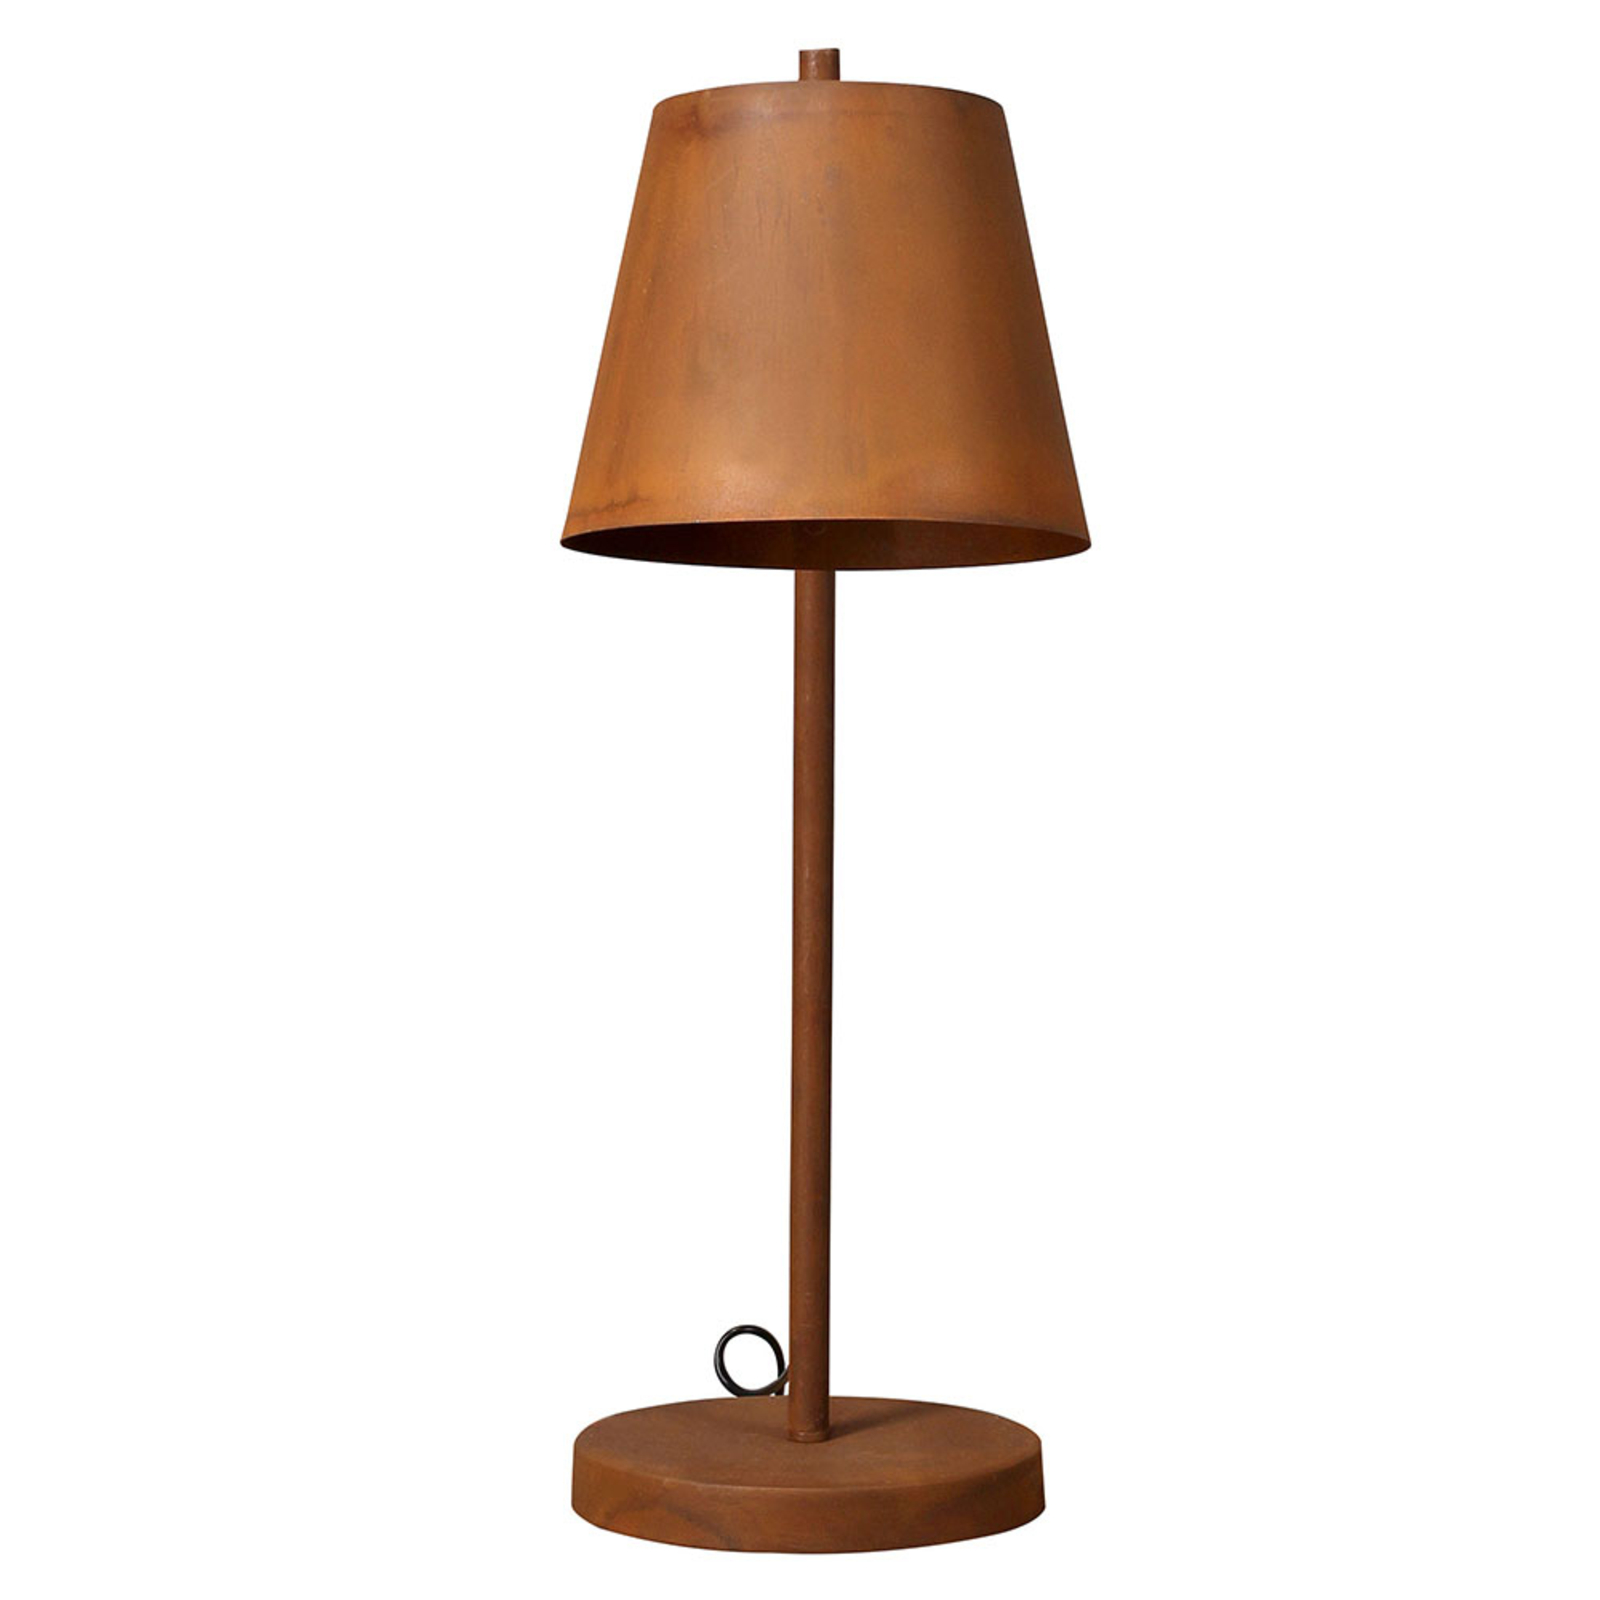 Colt table lamp, one-bulb, patina